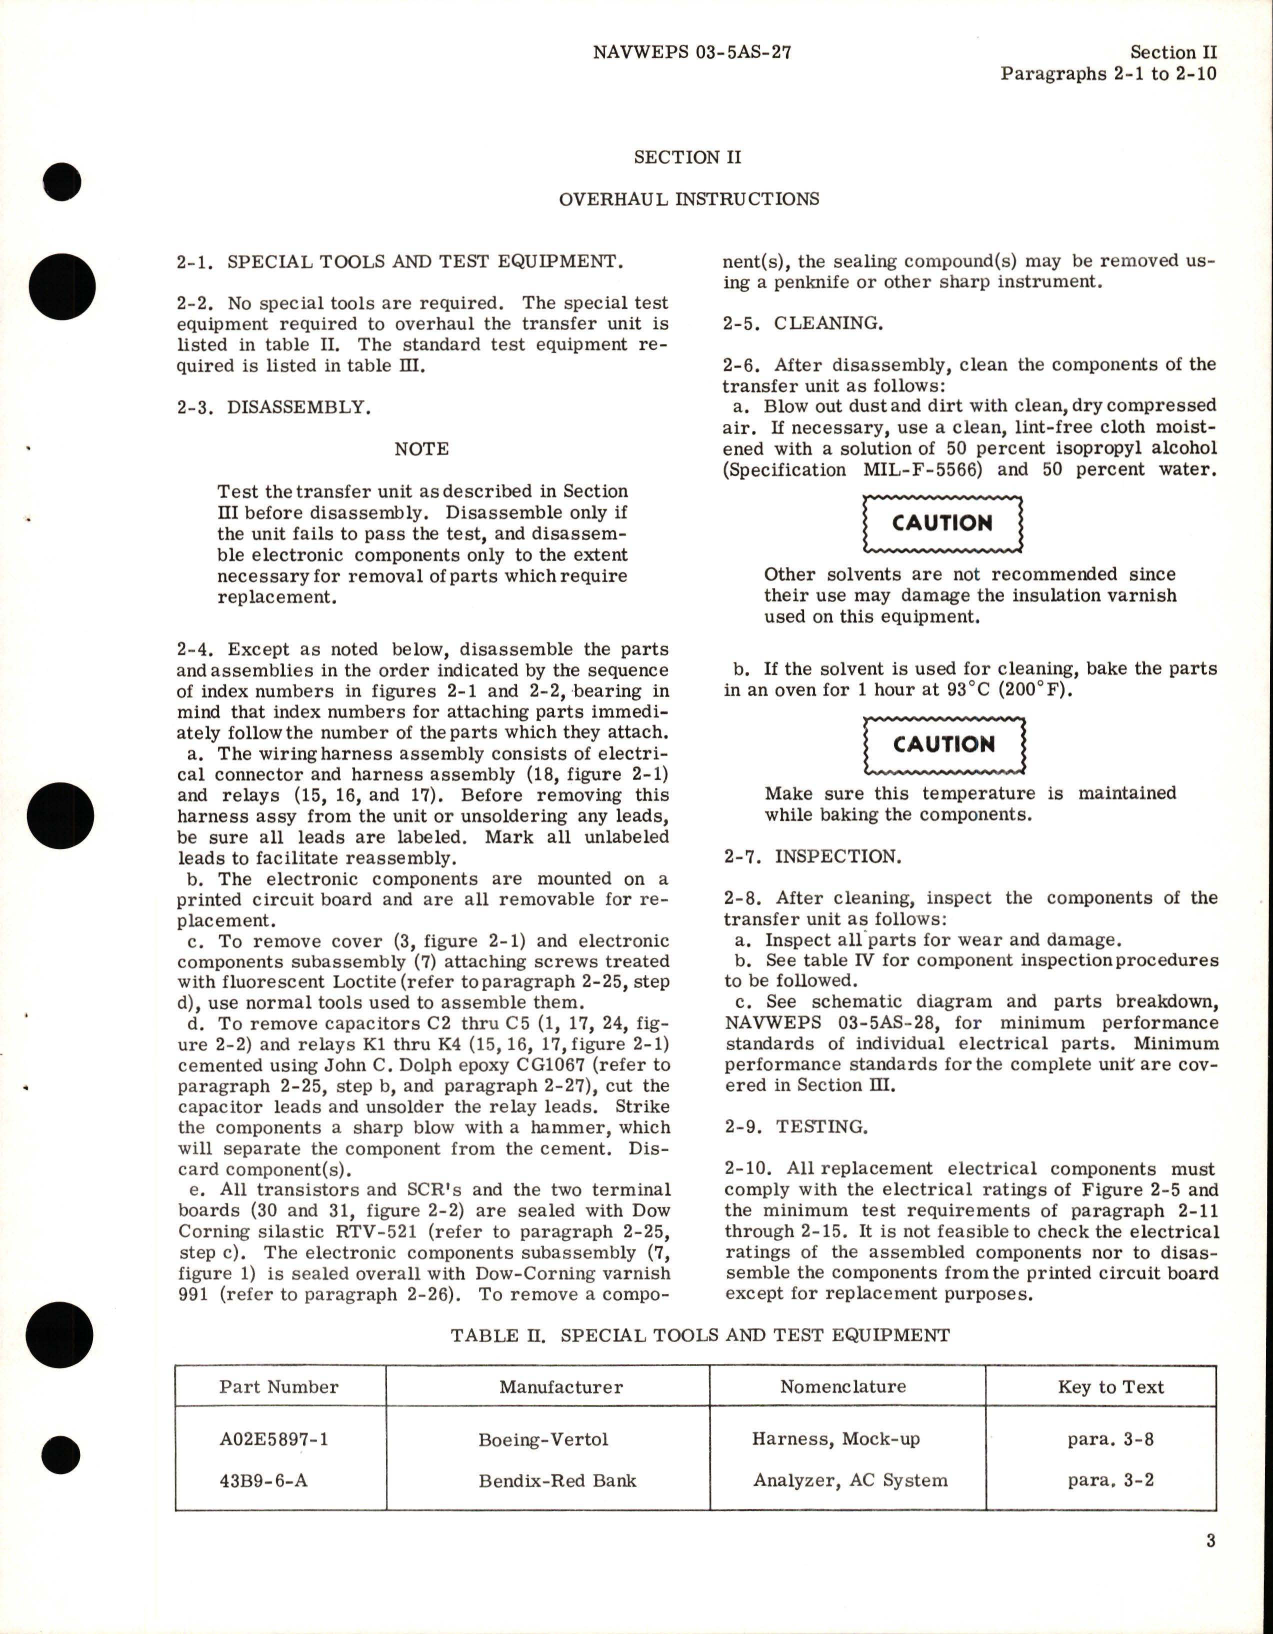 Sample page 7 from AirCorps Library document: Overhaul Instructions for Transfer Unit - Part 34B74-2-A 